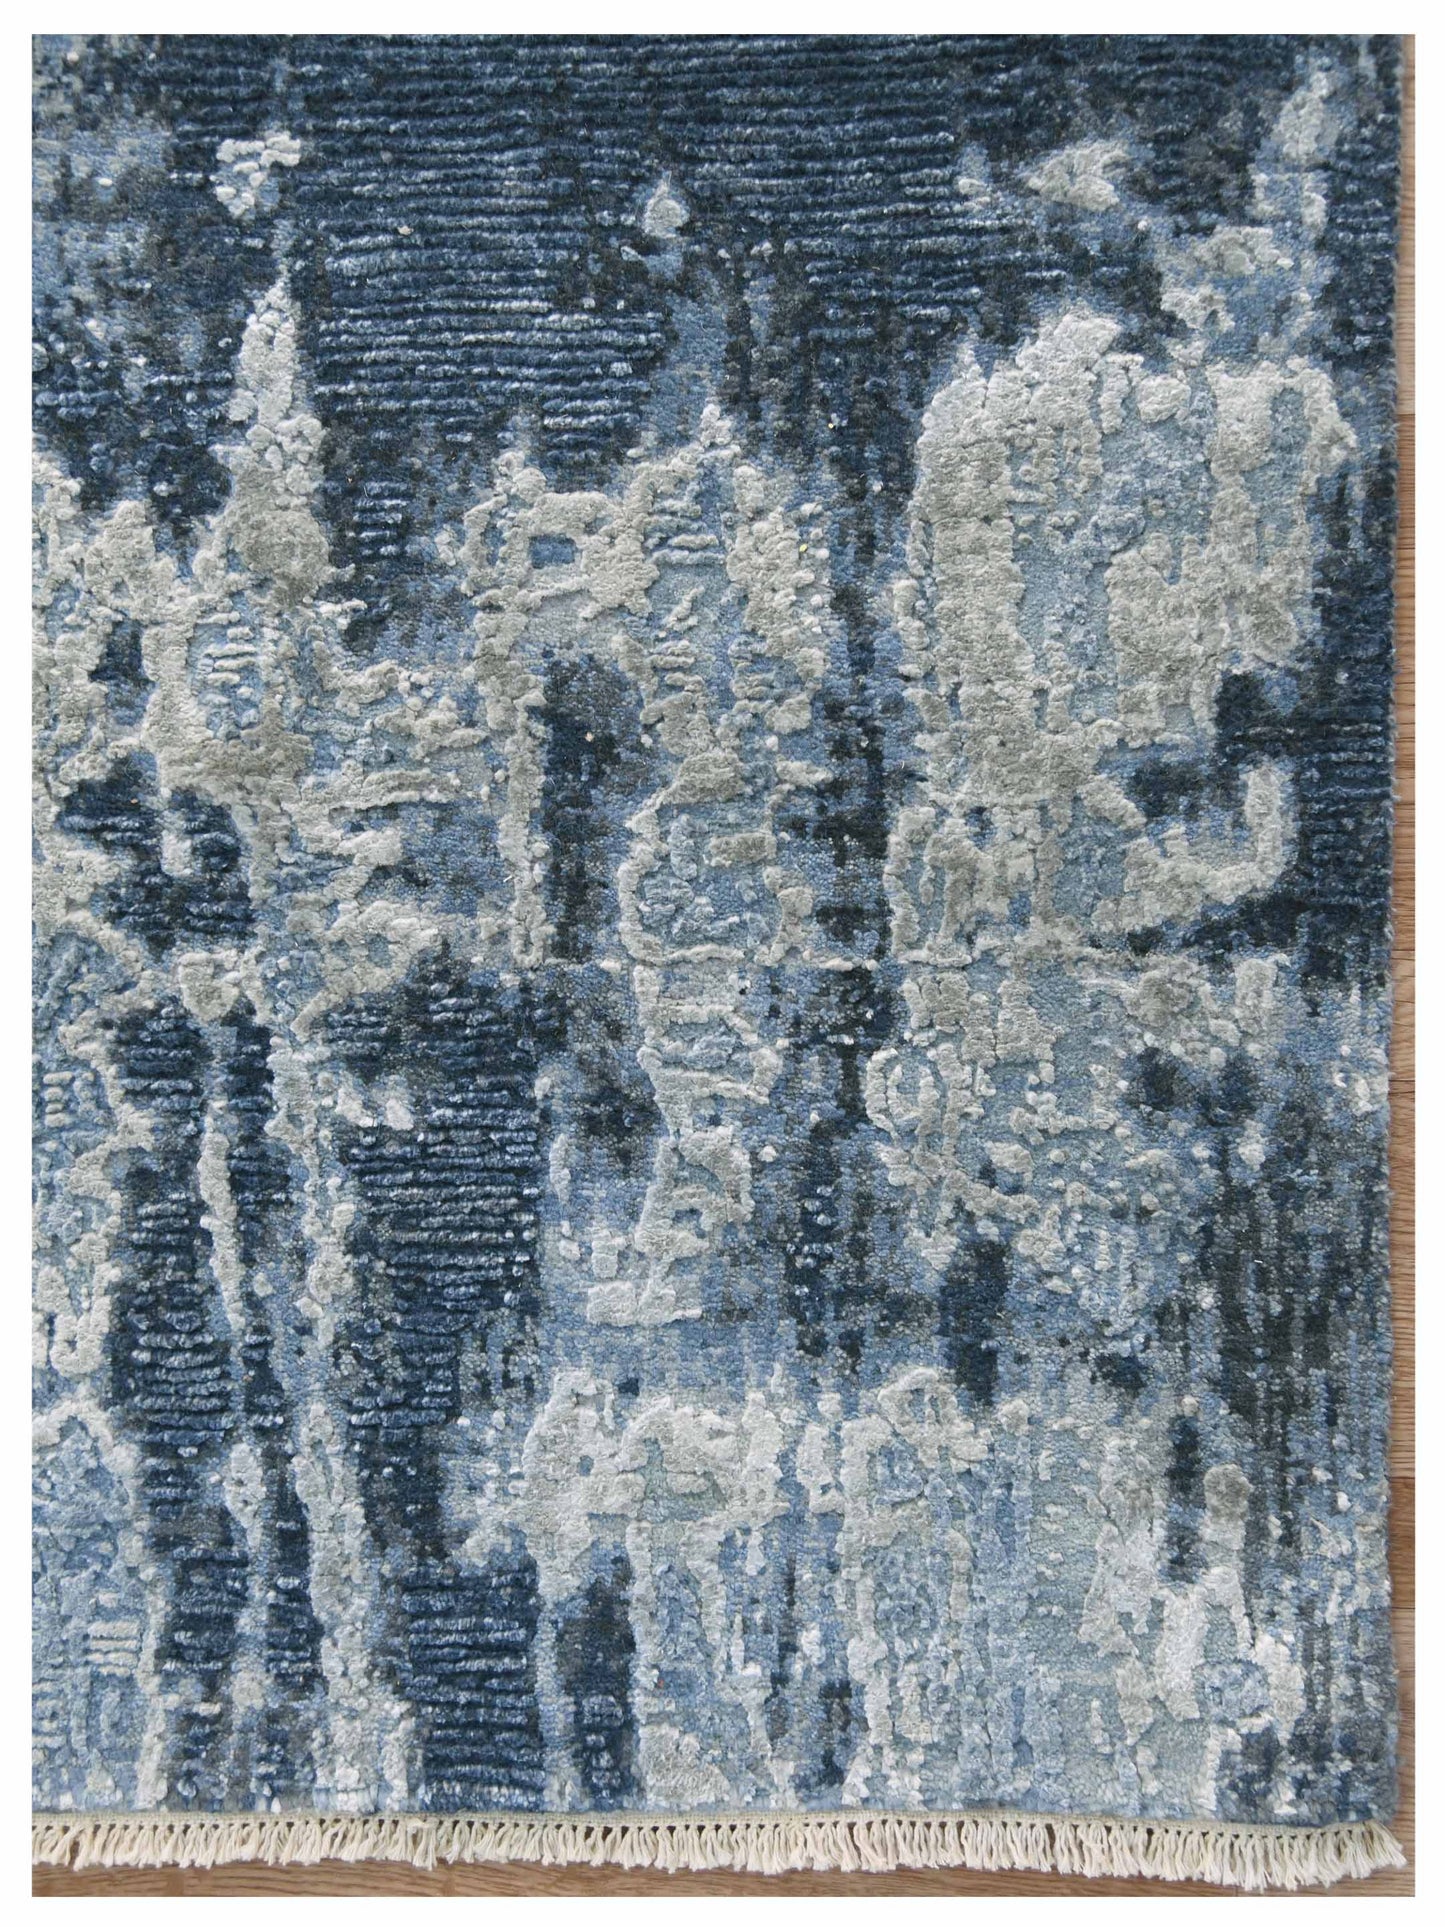 Limited Zelma WI-482 BLUE SAPPHIRE  Transitional Knotted Rug